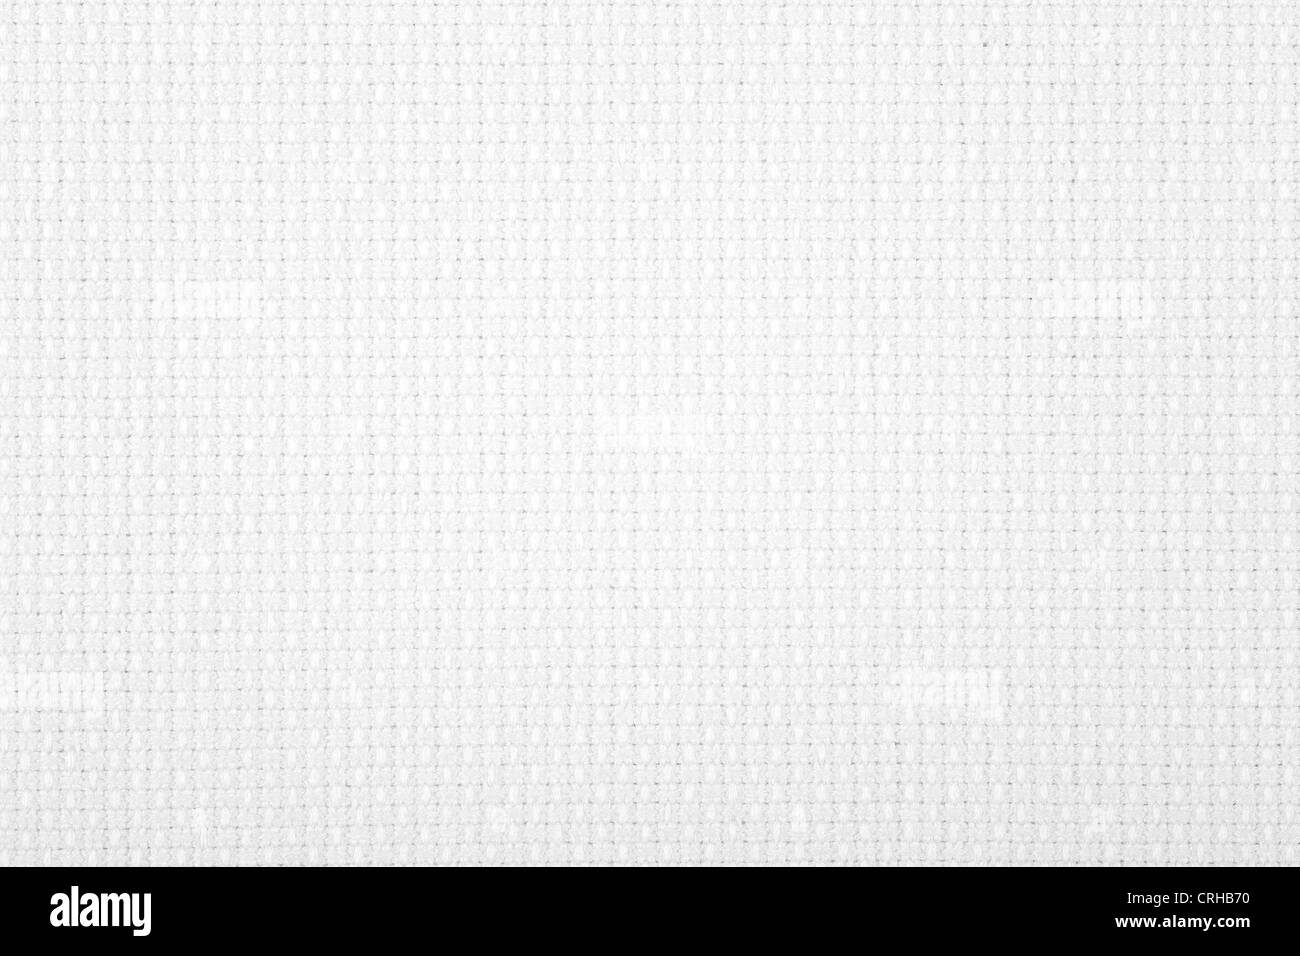 white canvas background, linen texture in grid pattern Stock Photo